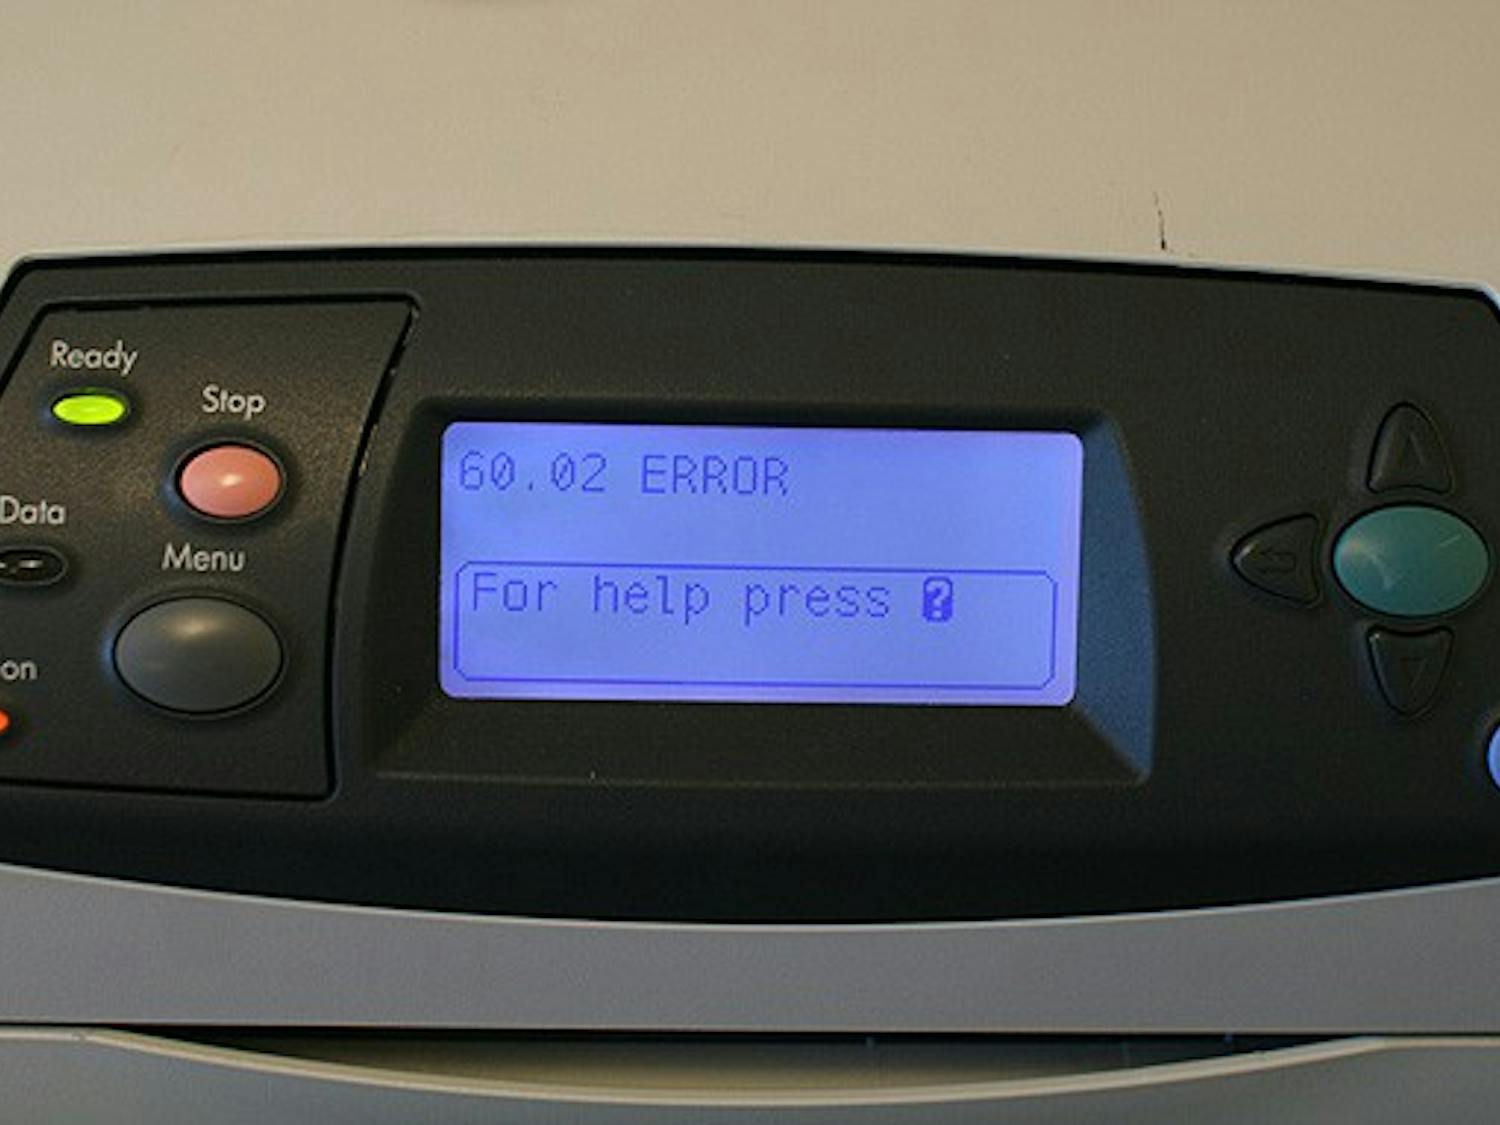 OIT attributes the ePrint errors in part due to a higher printing volume.